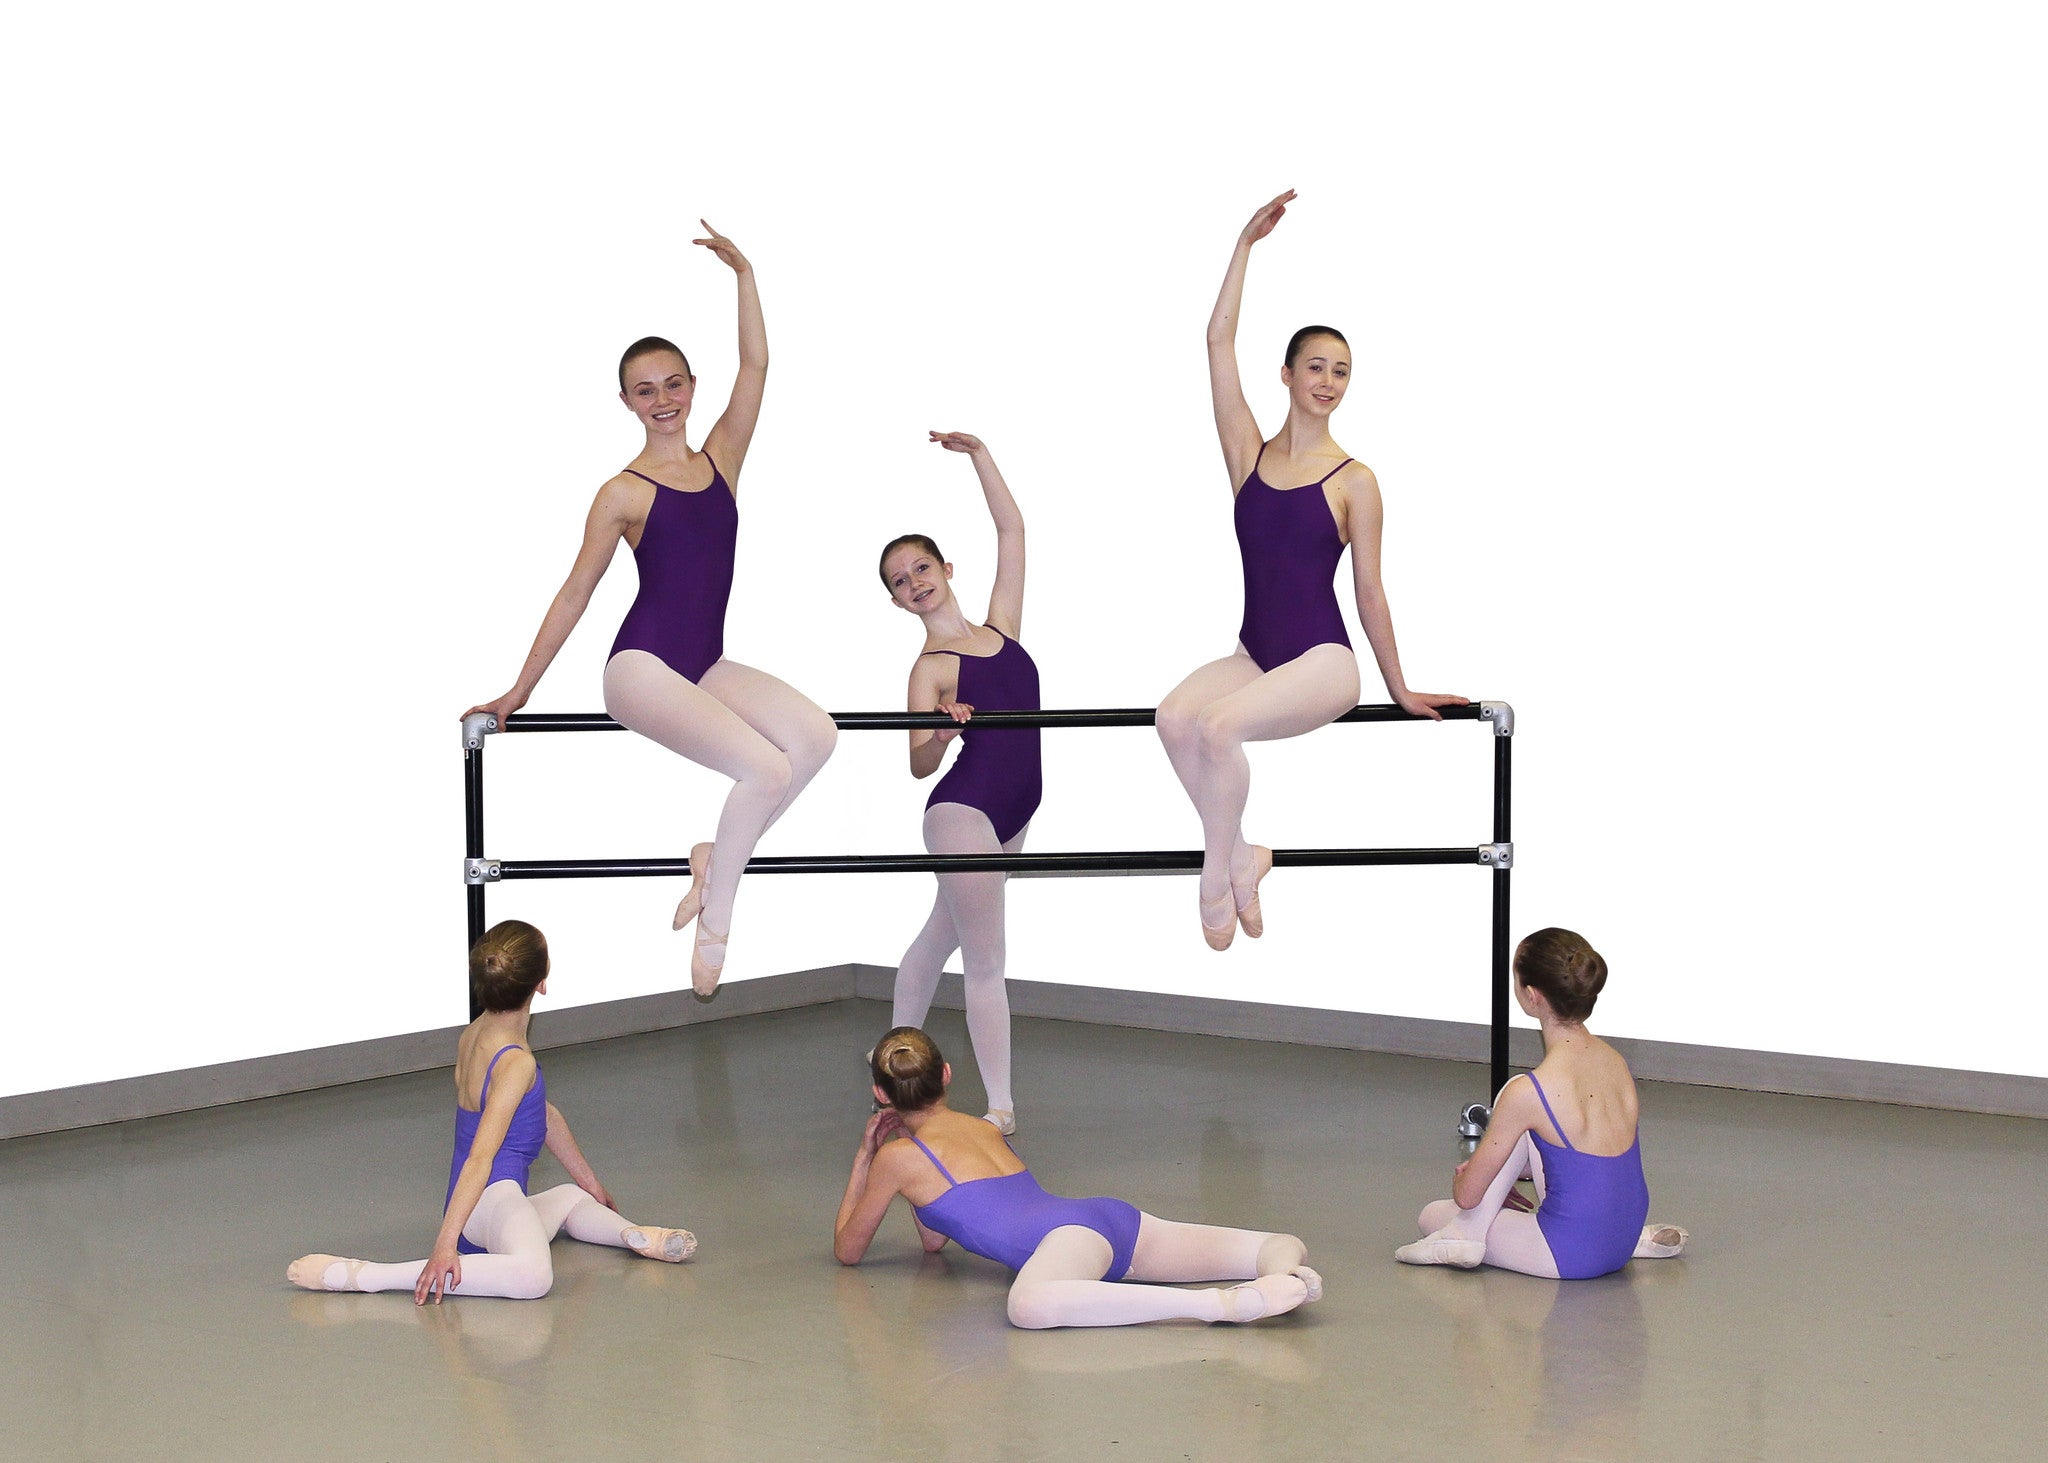 How to Choose a Kids' Ballet Barre: Considering All Options